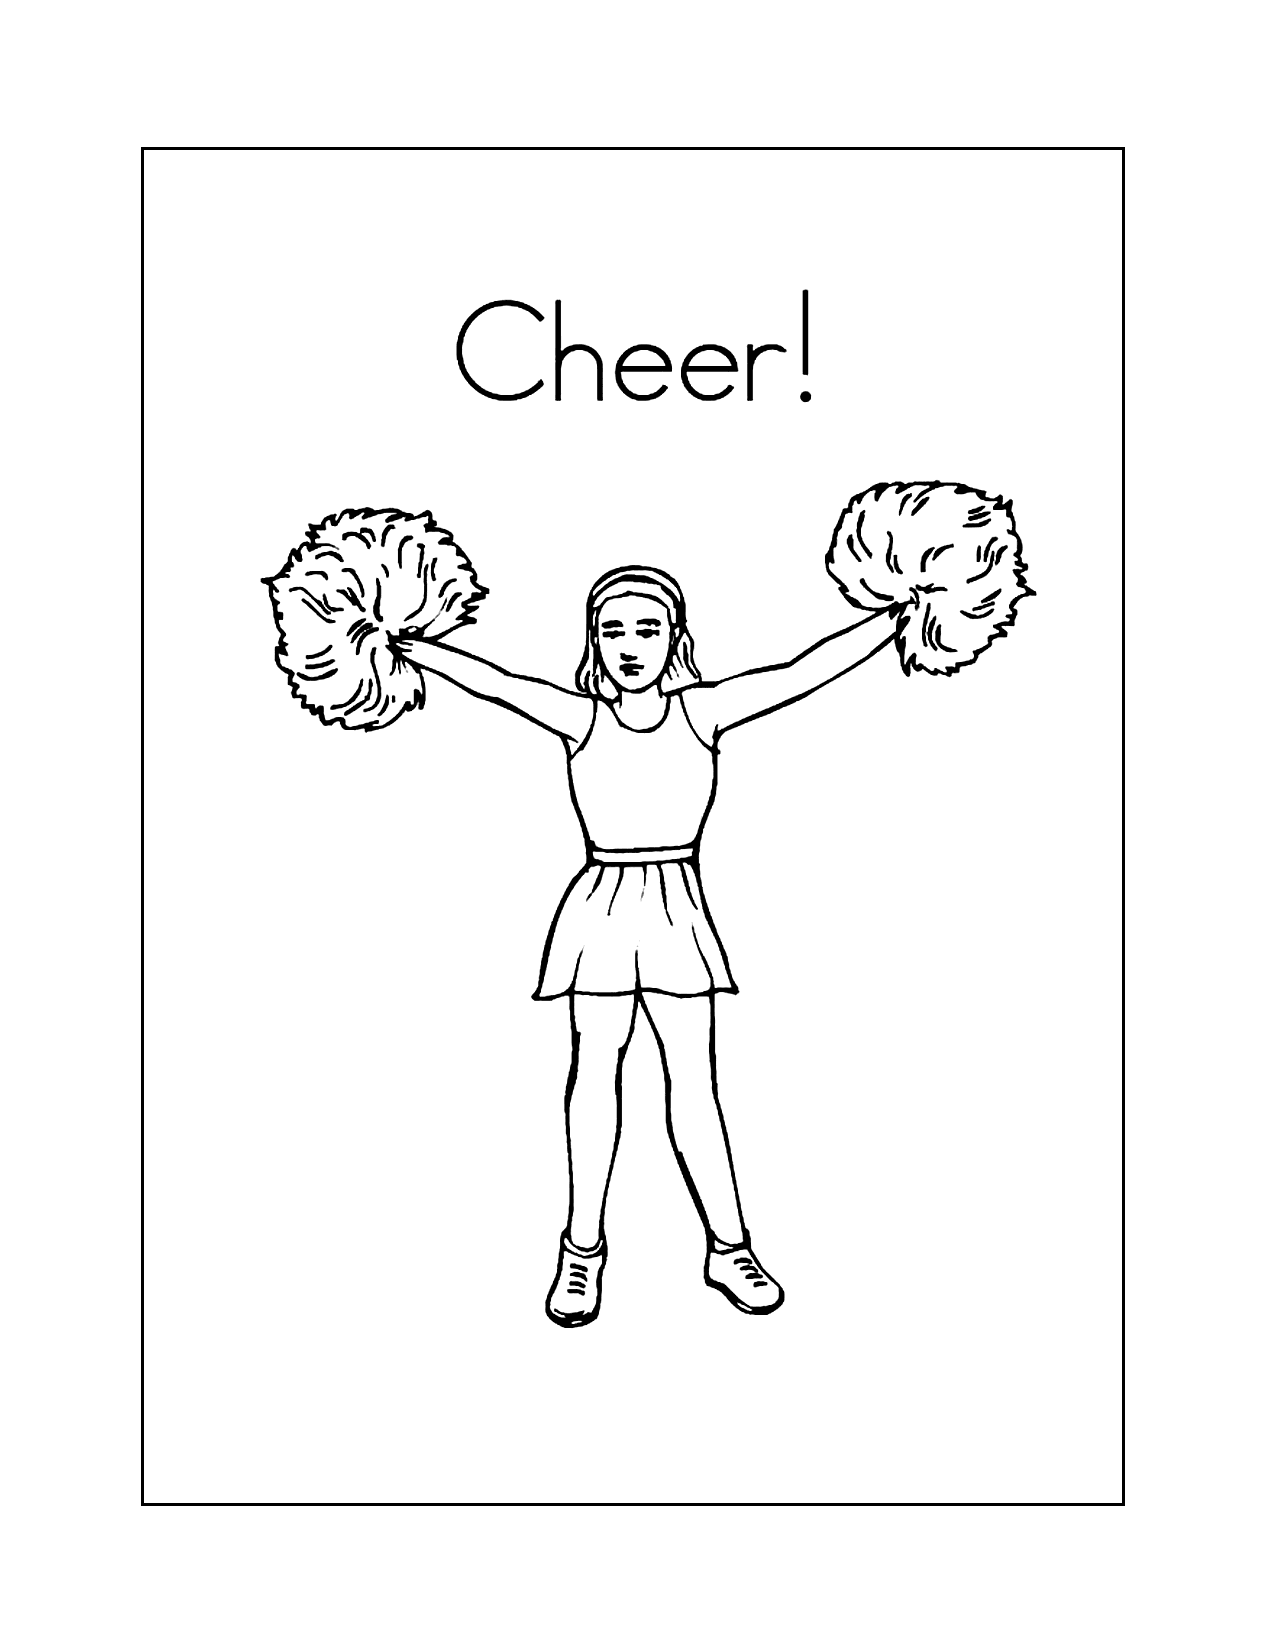 Cheer Coloring Pages